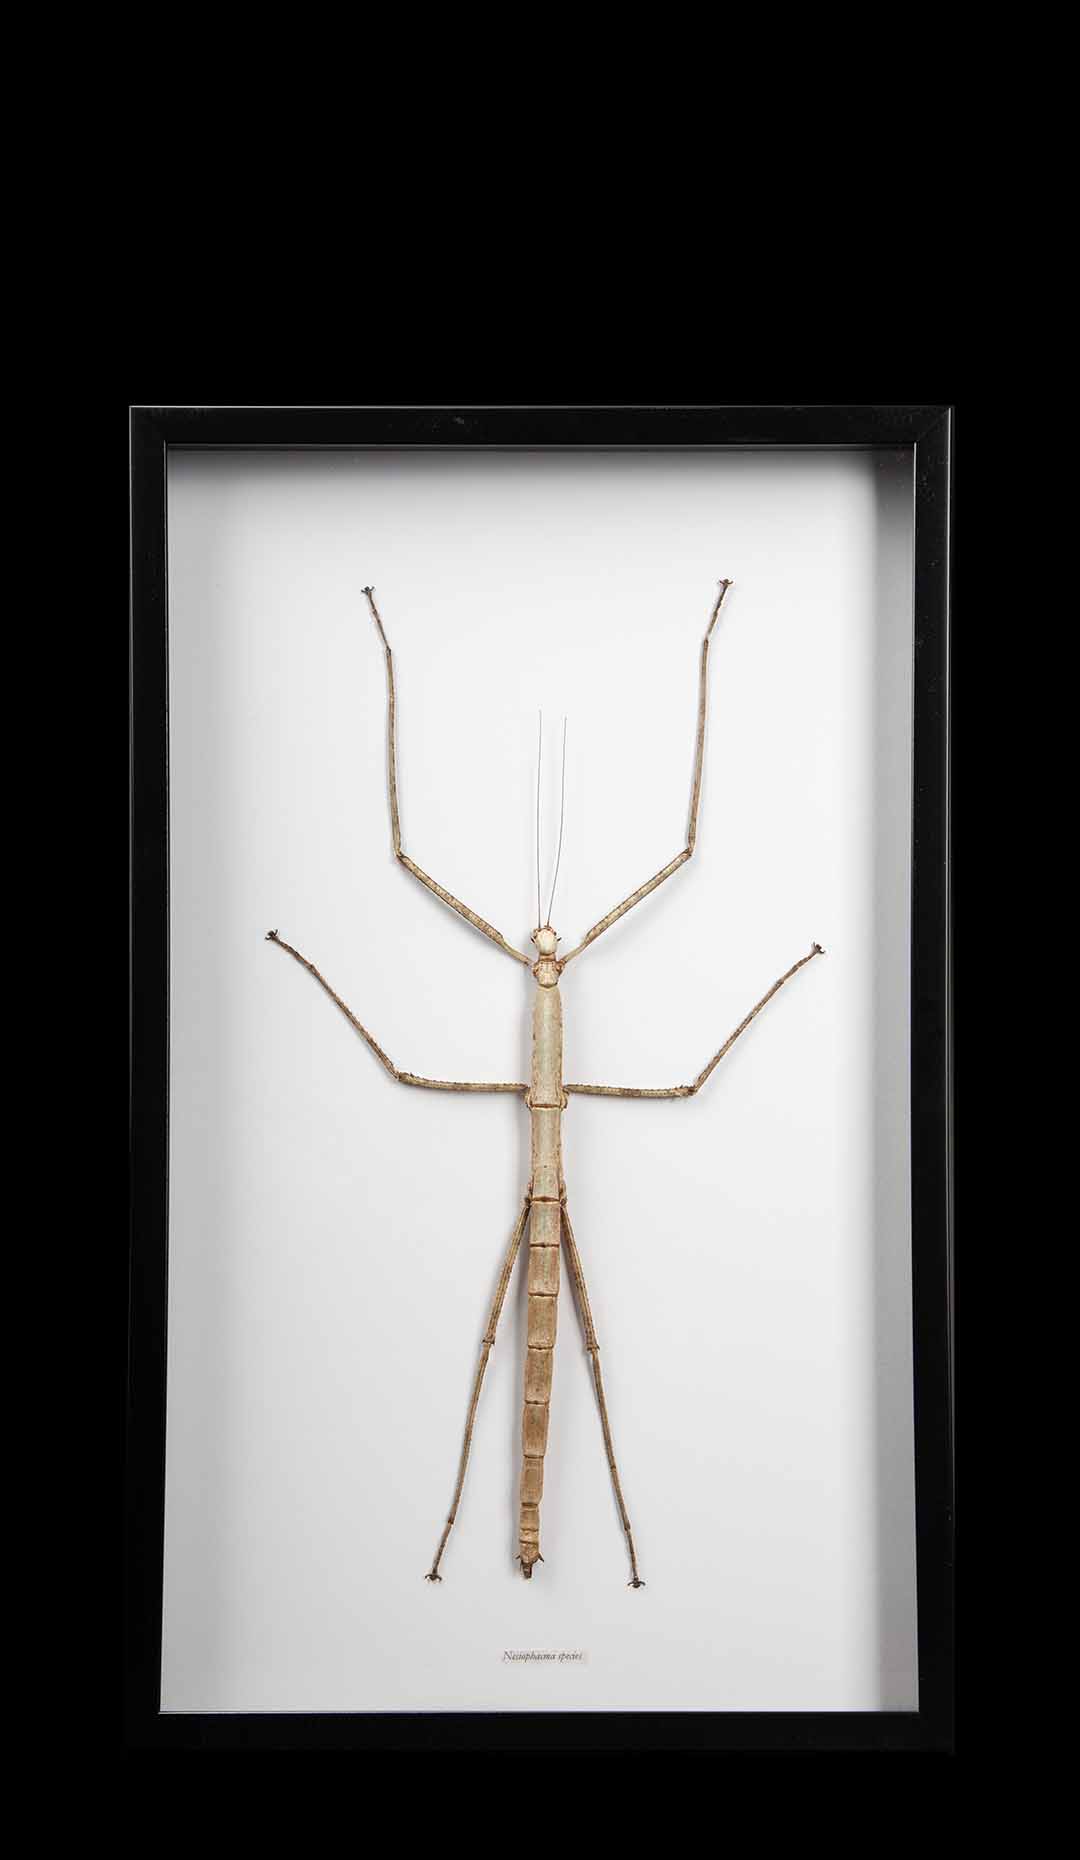 Framed “Nesiophasma Species” Large Stick Insect